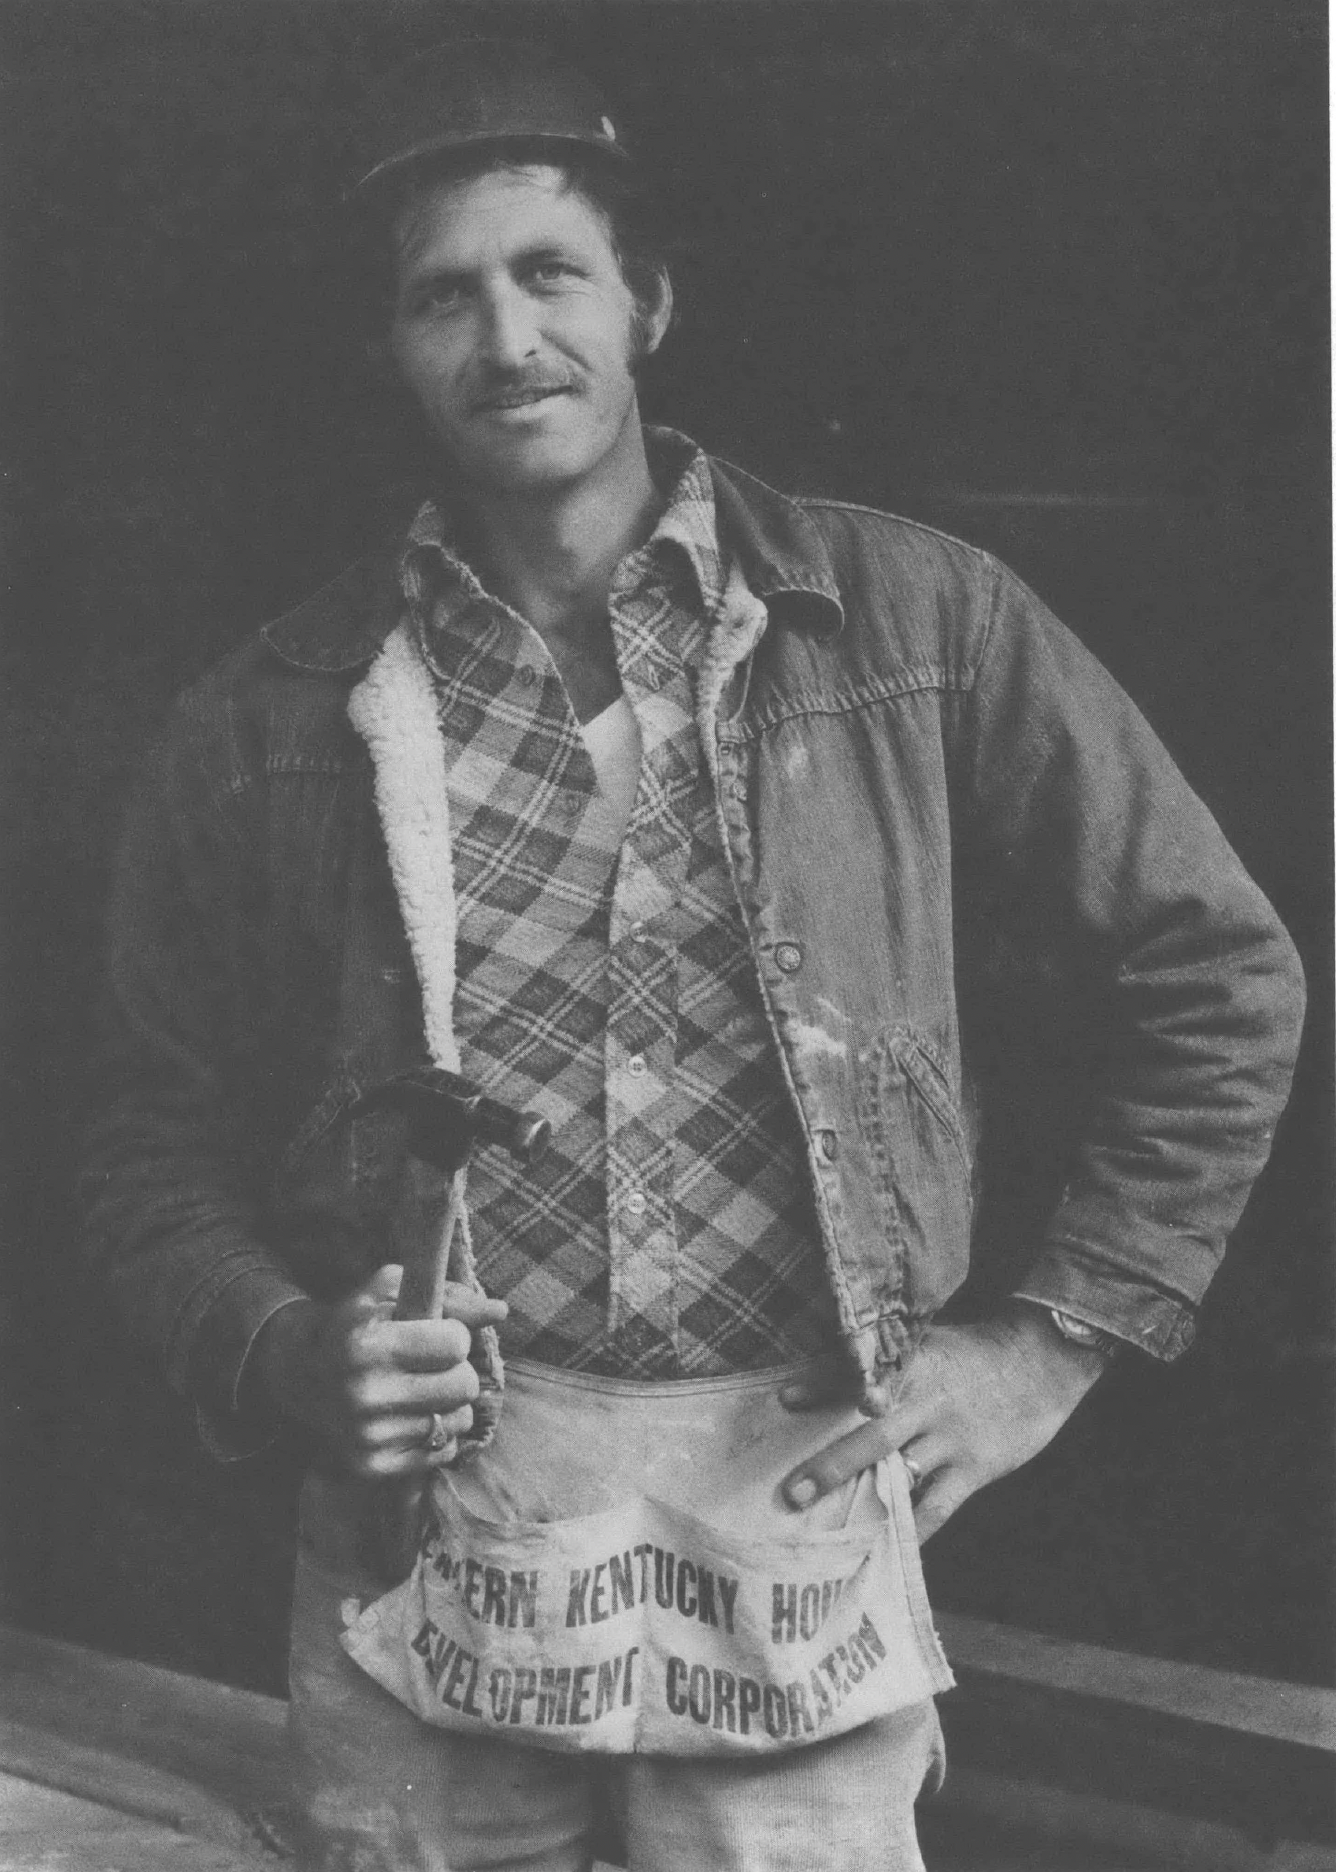 Black and white photo of young man wearing plaid shirt, jacket, and tool belt